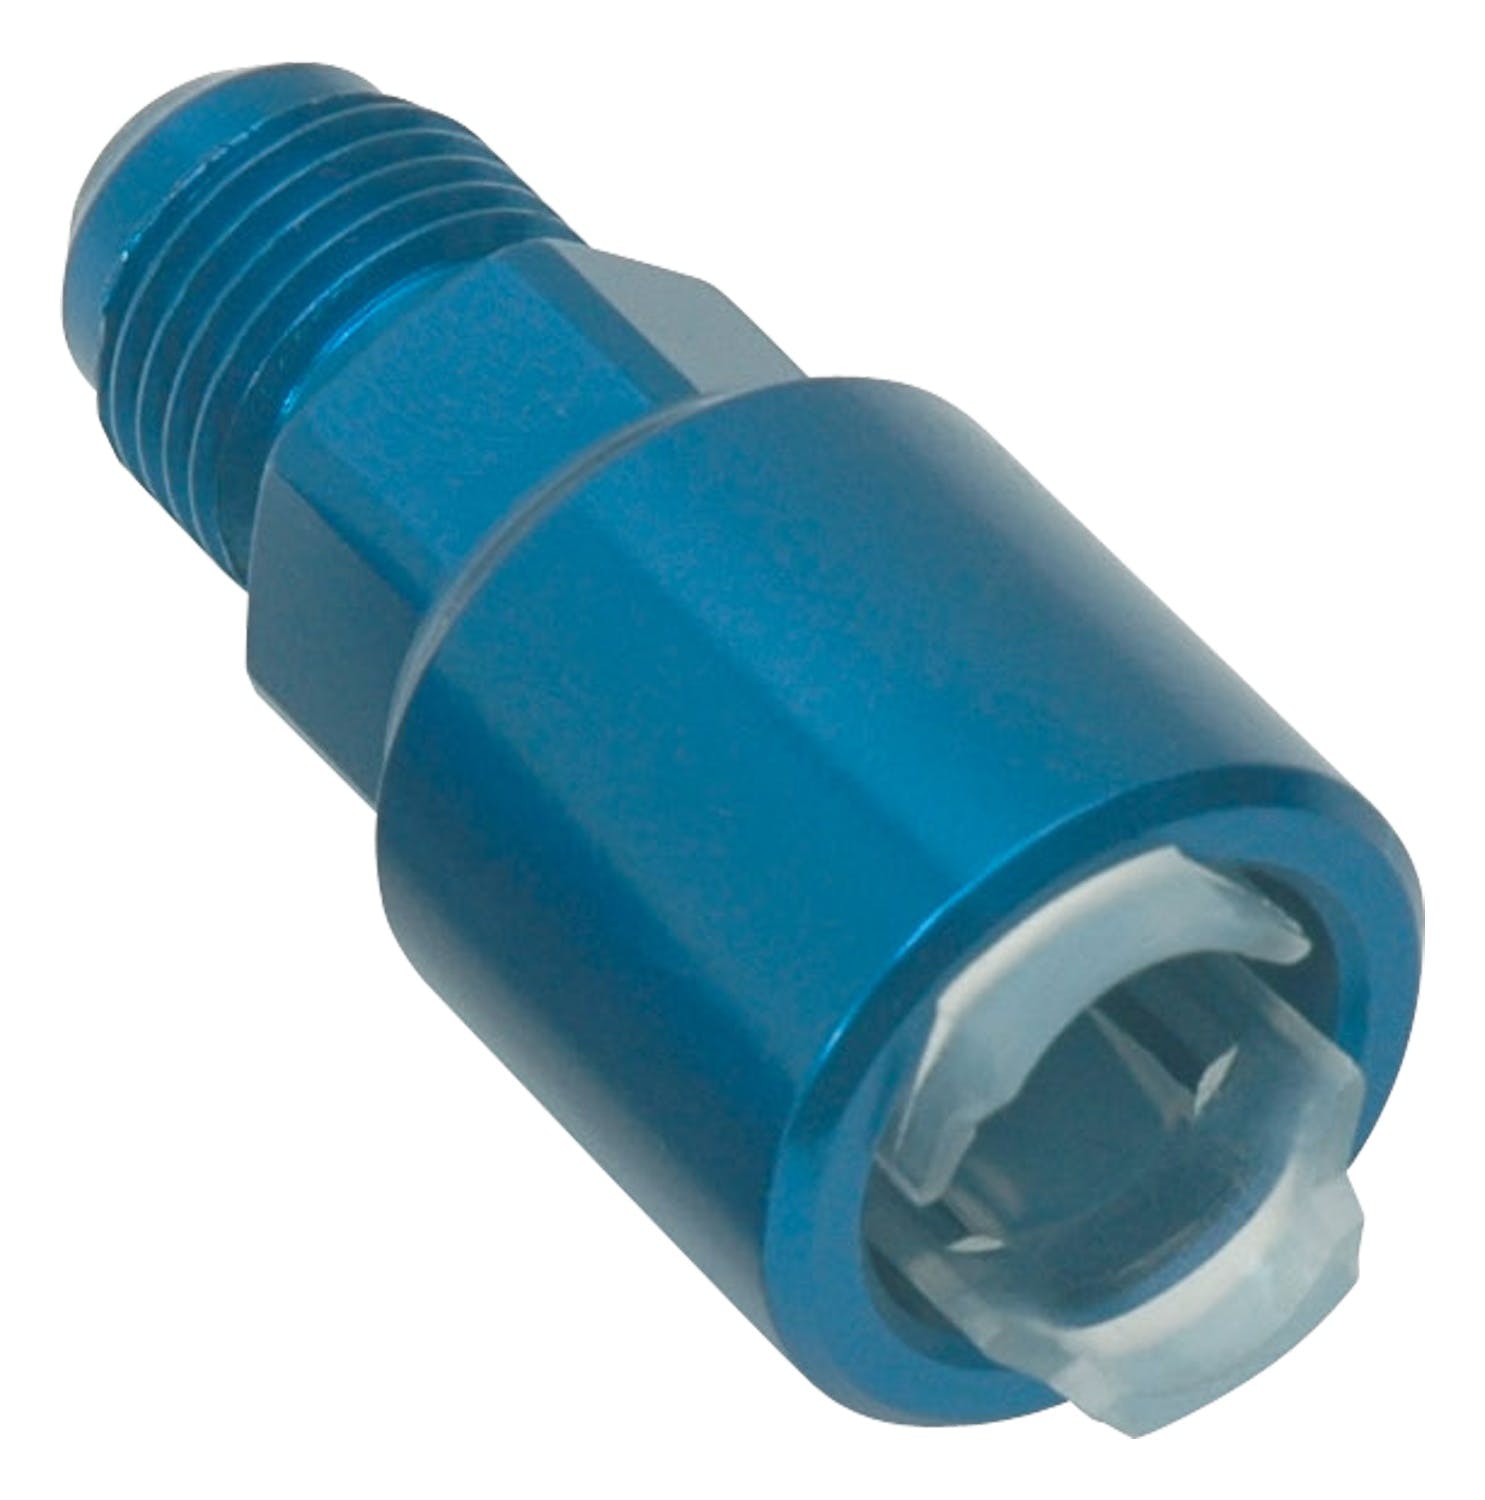 Russell 640860 Push-On EFI Fittings